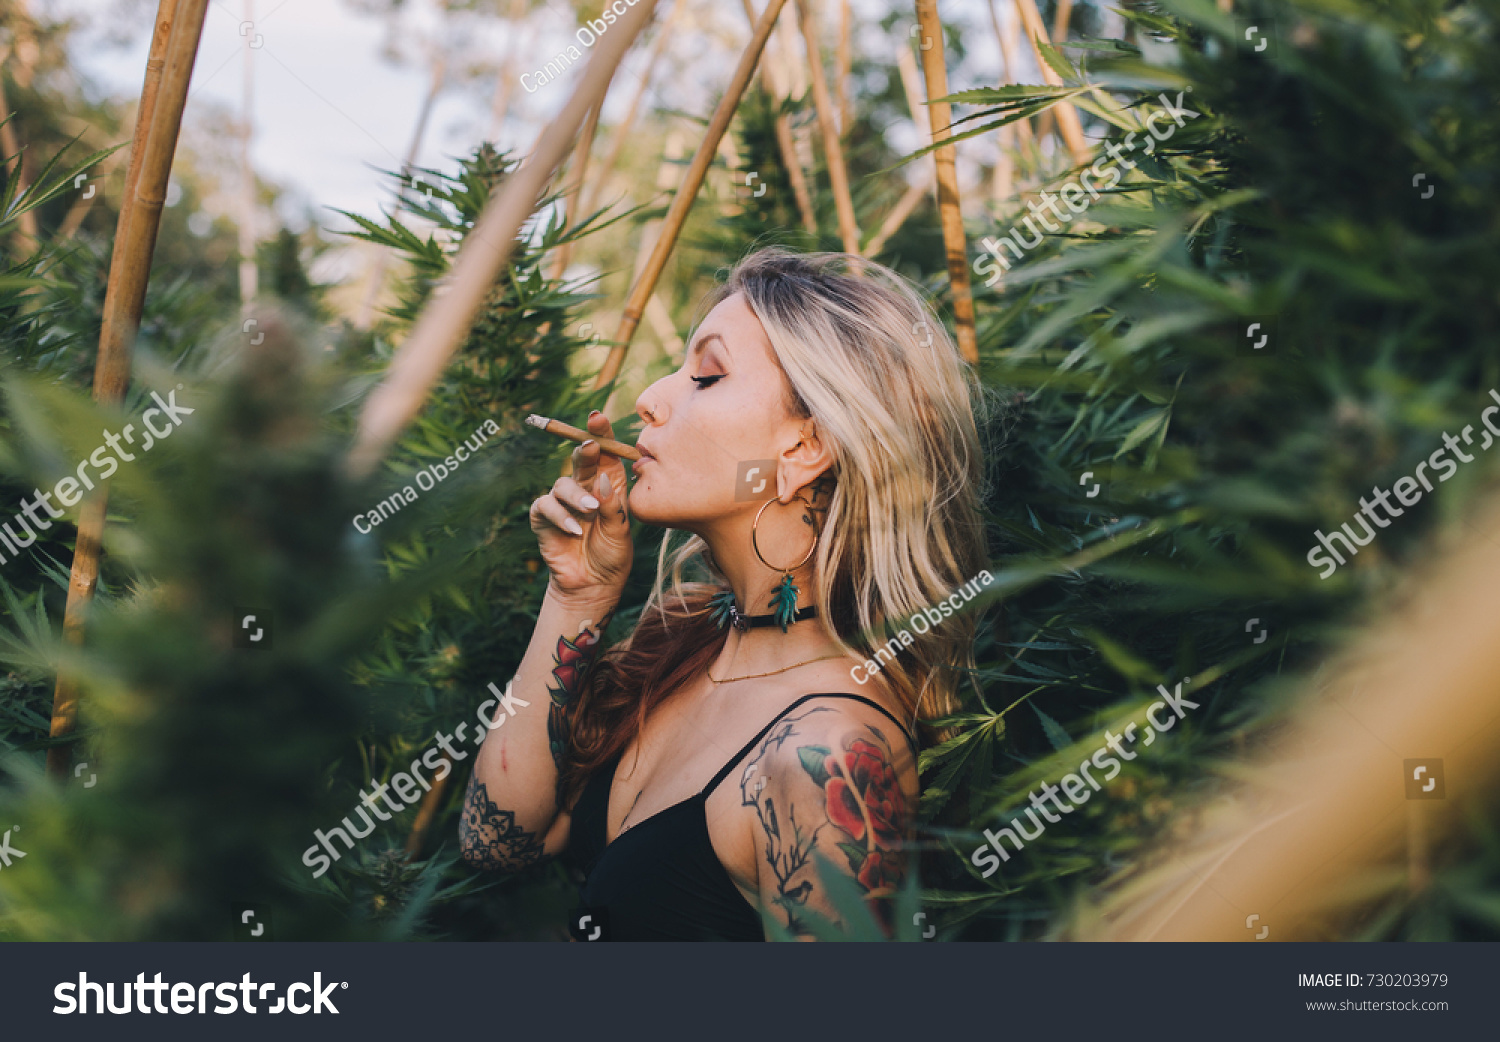 christina blackwood recommends beautiful women smoking weed pic